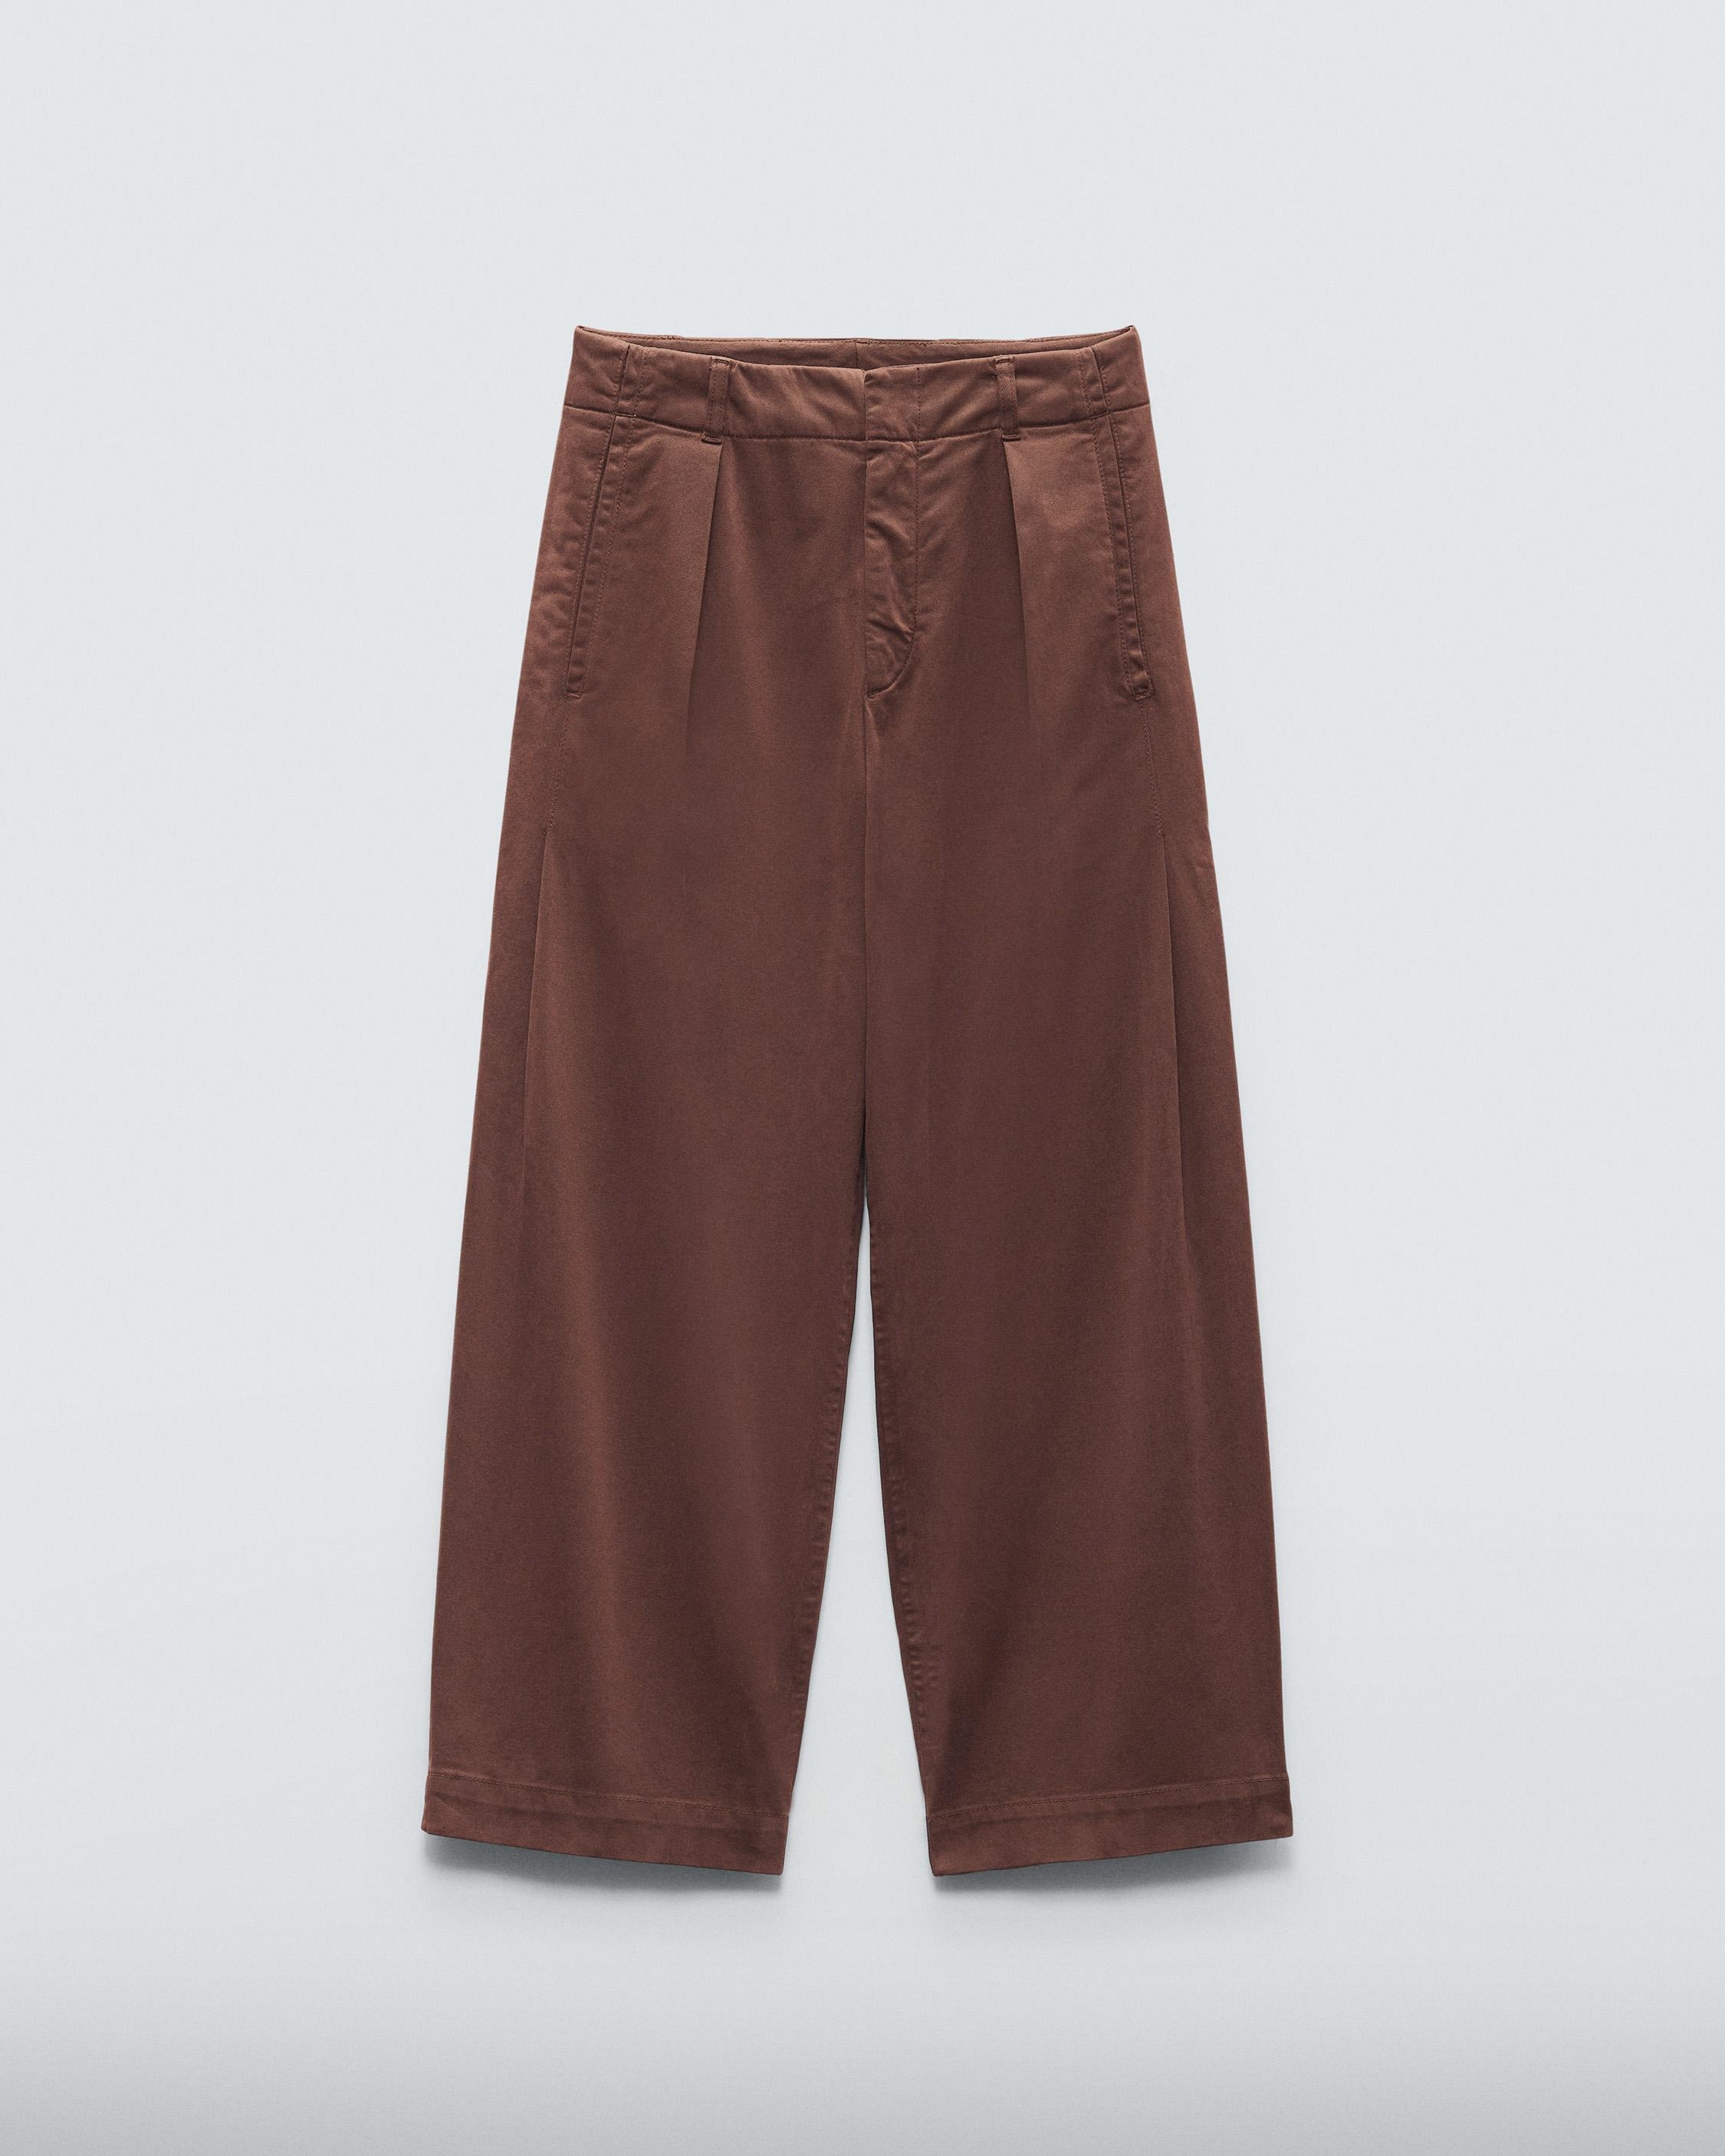 Donovan Cotton Pant
Relaxed Fit - 1